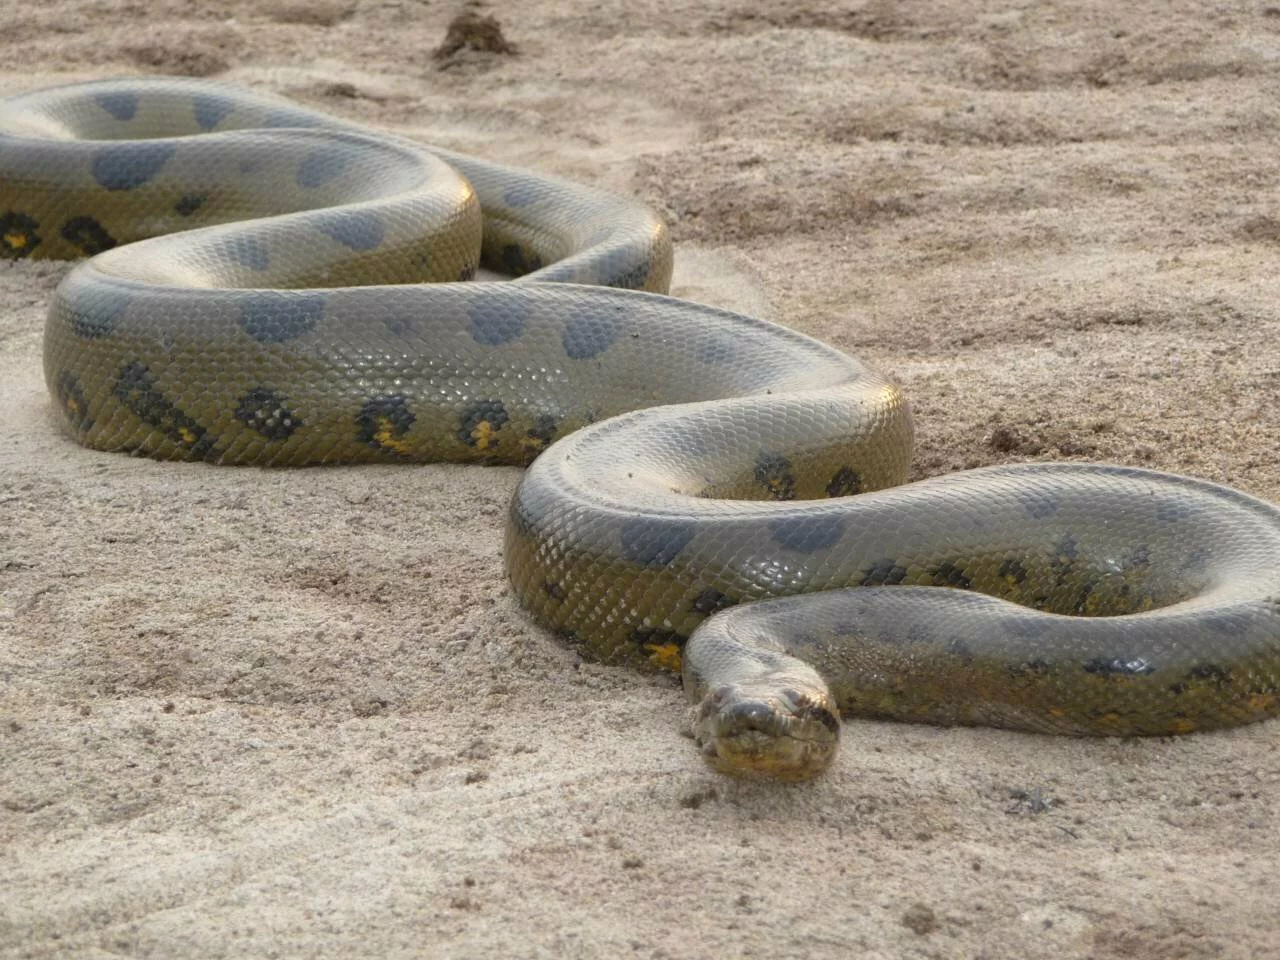 Constrictor snakes, such as this green anaconda (Eunectes murinus), are very powerful animals and are commonly feared by people. snakespictures.net